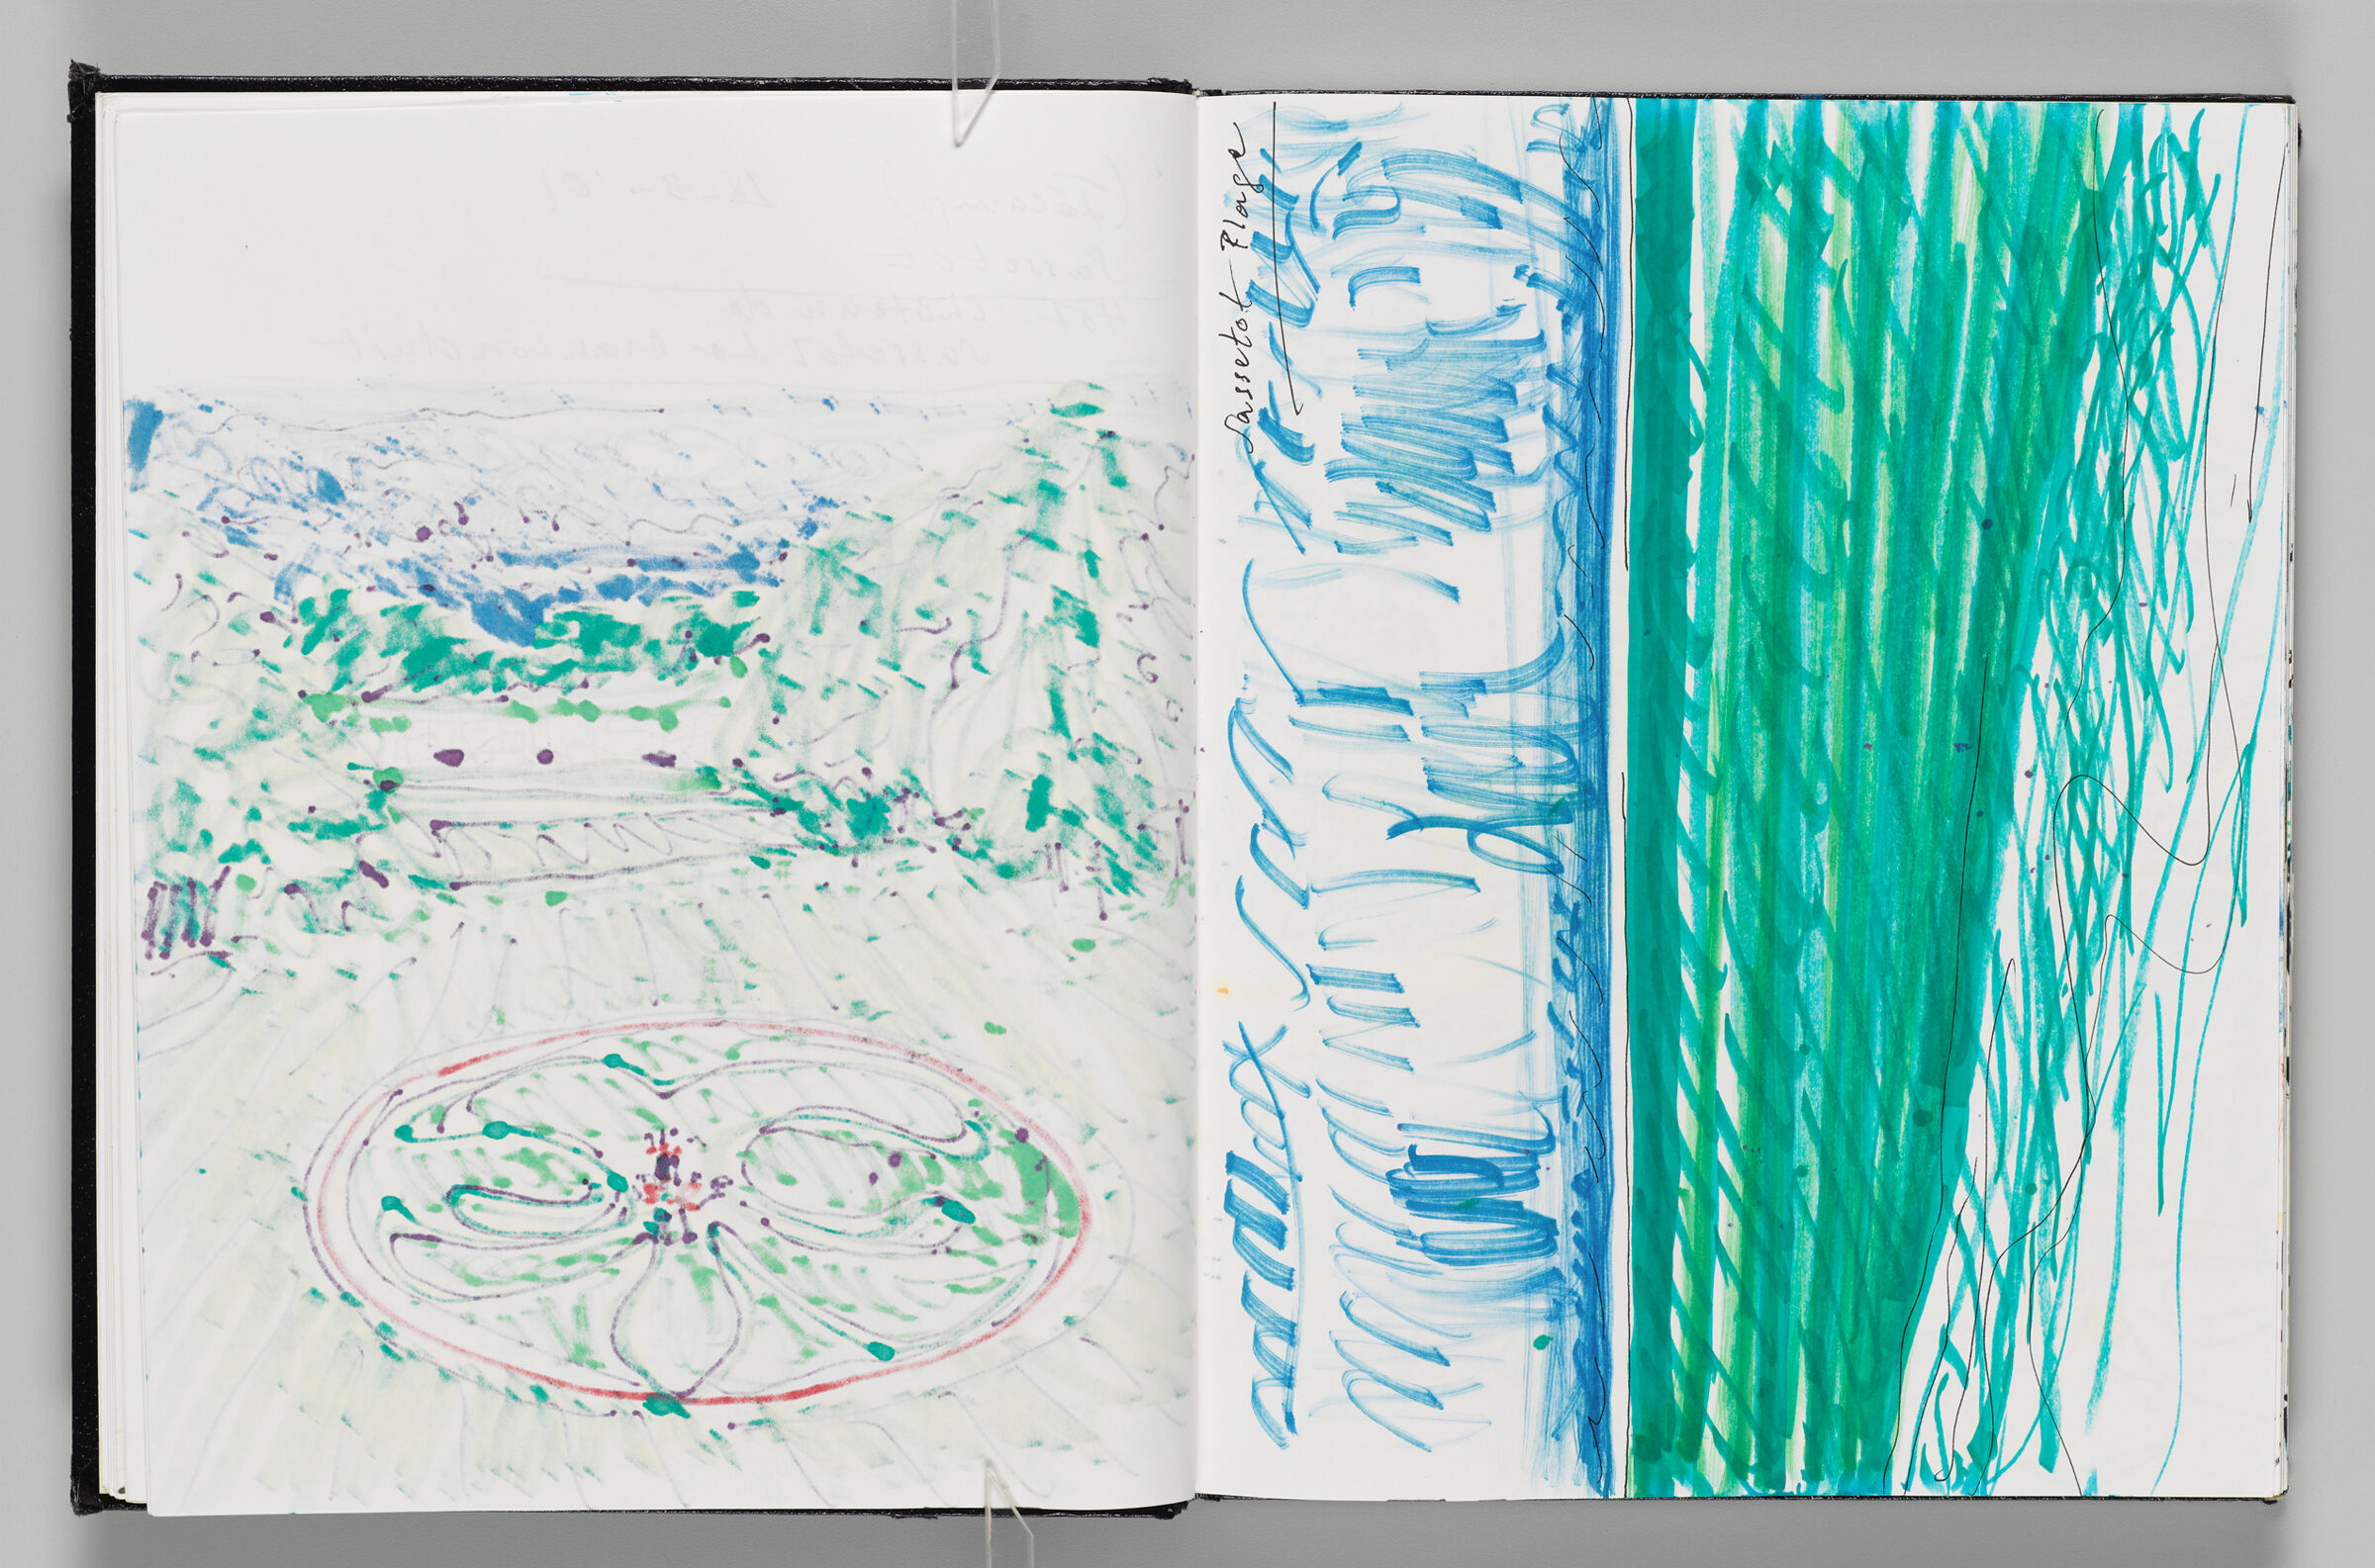 Untitled (Bleed-Through Of Previous Page, Left Page); Untitled (Beachscape In Sassetot, France, Right Page)